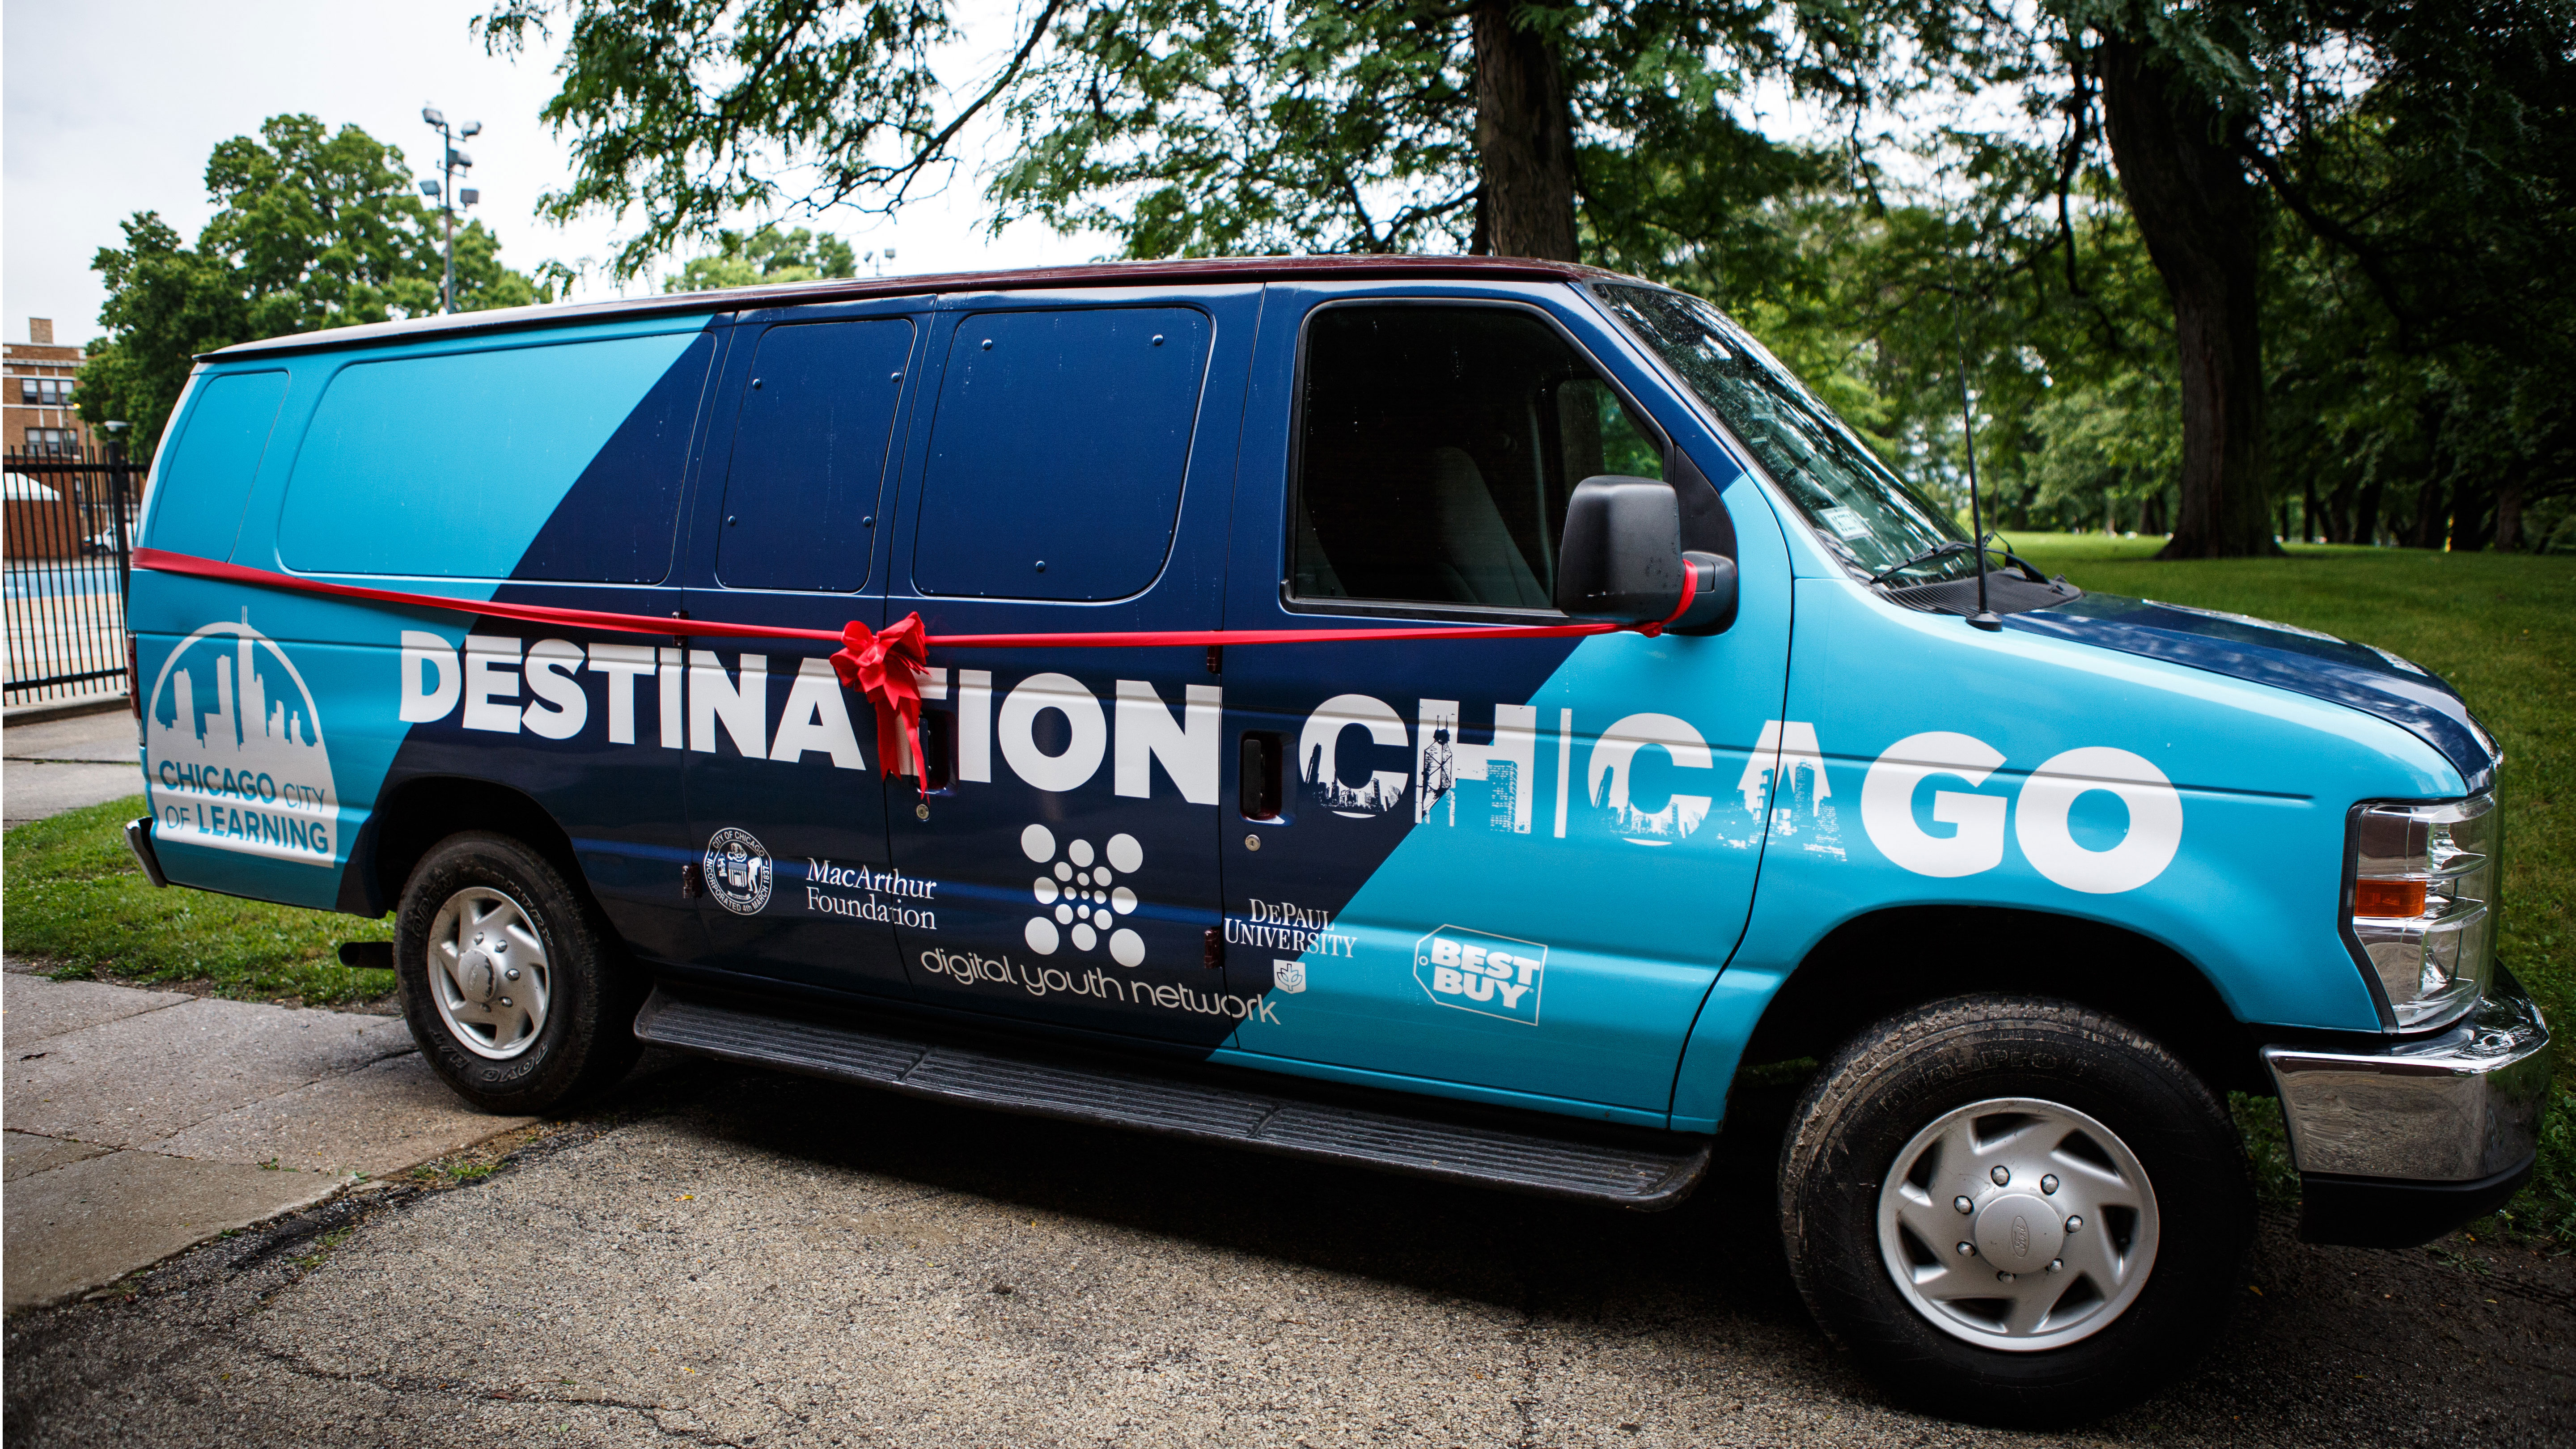 The mobile vans used in the summer of 2015 to bring computational thinking programming to neighborhoods without access.